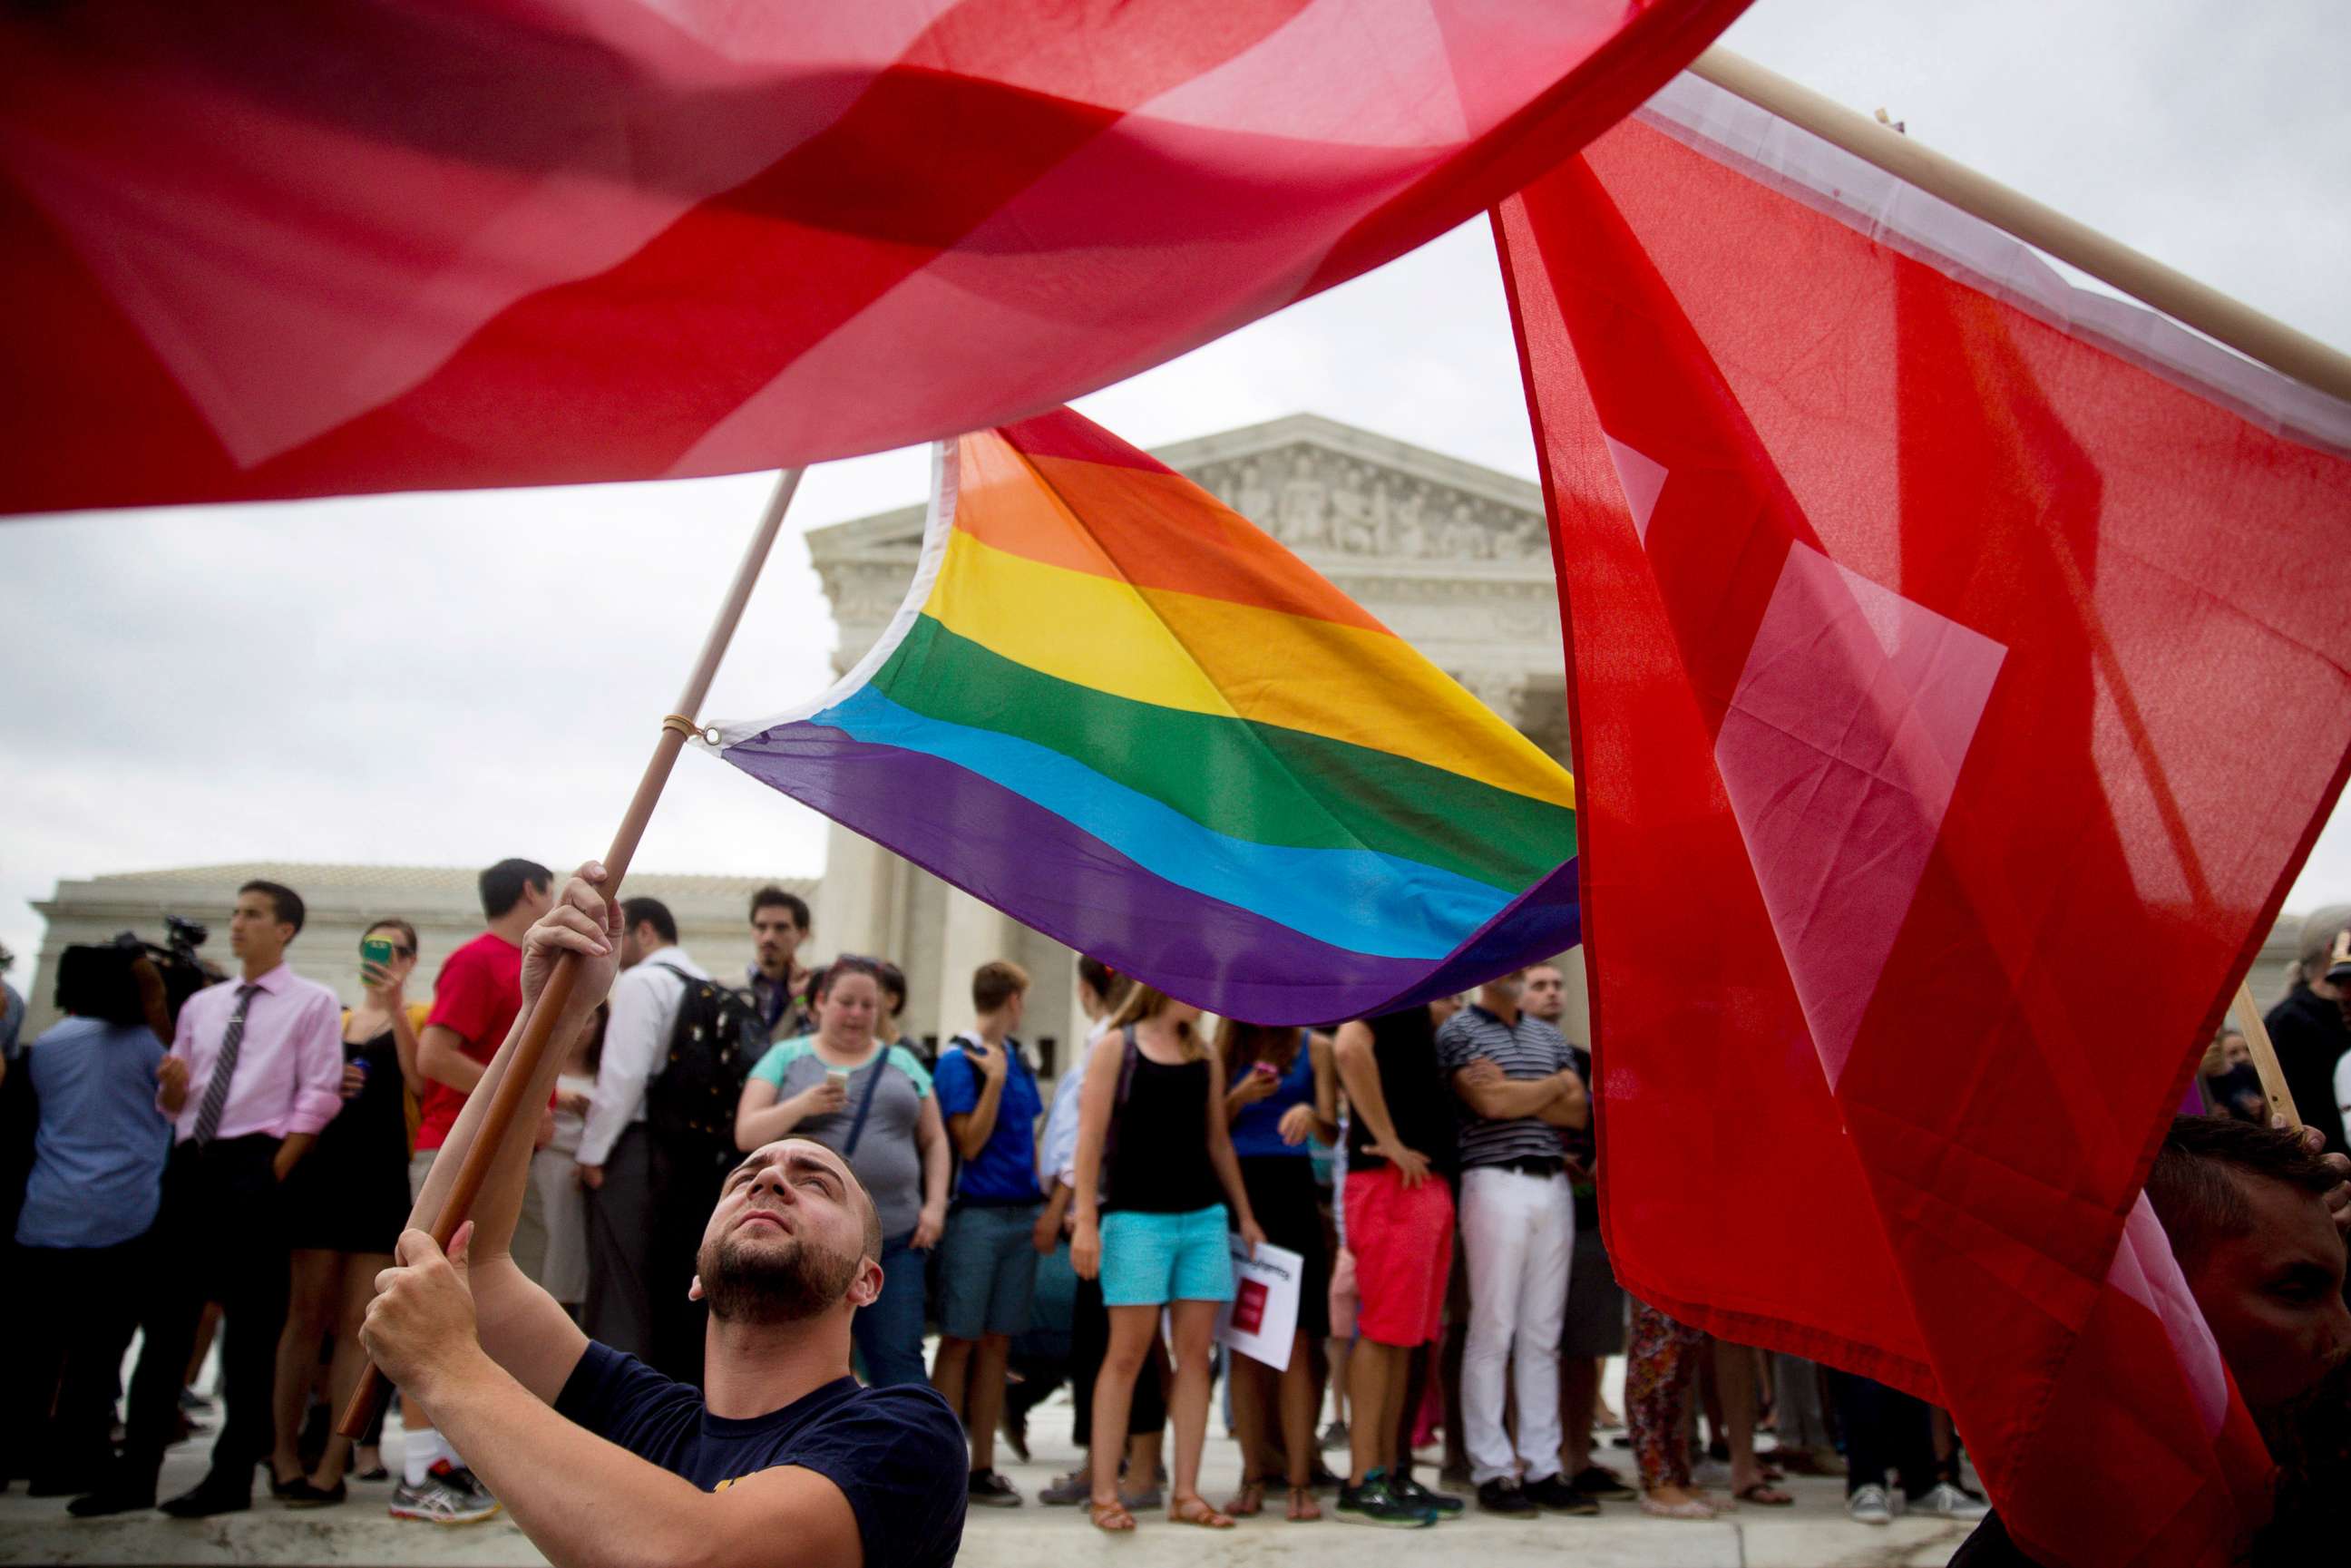 PHOTO: A demonstrator in support of same-sex marriage waves a rainbow colored flag after the same-sex marriage ruling outside the U.S. Supreme Court in Washington, D.C., June 26, 2015.